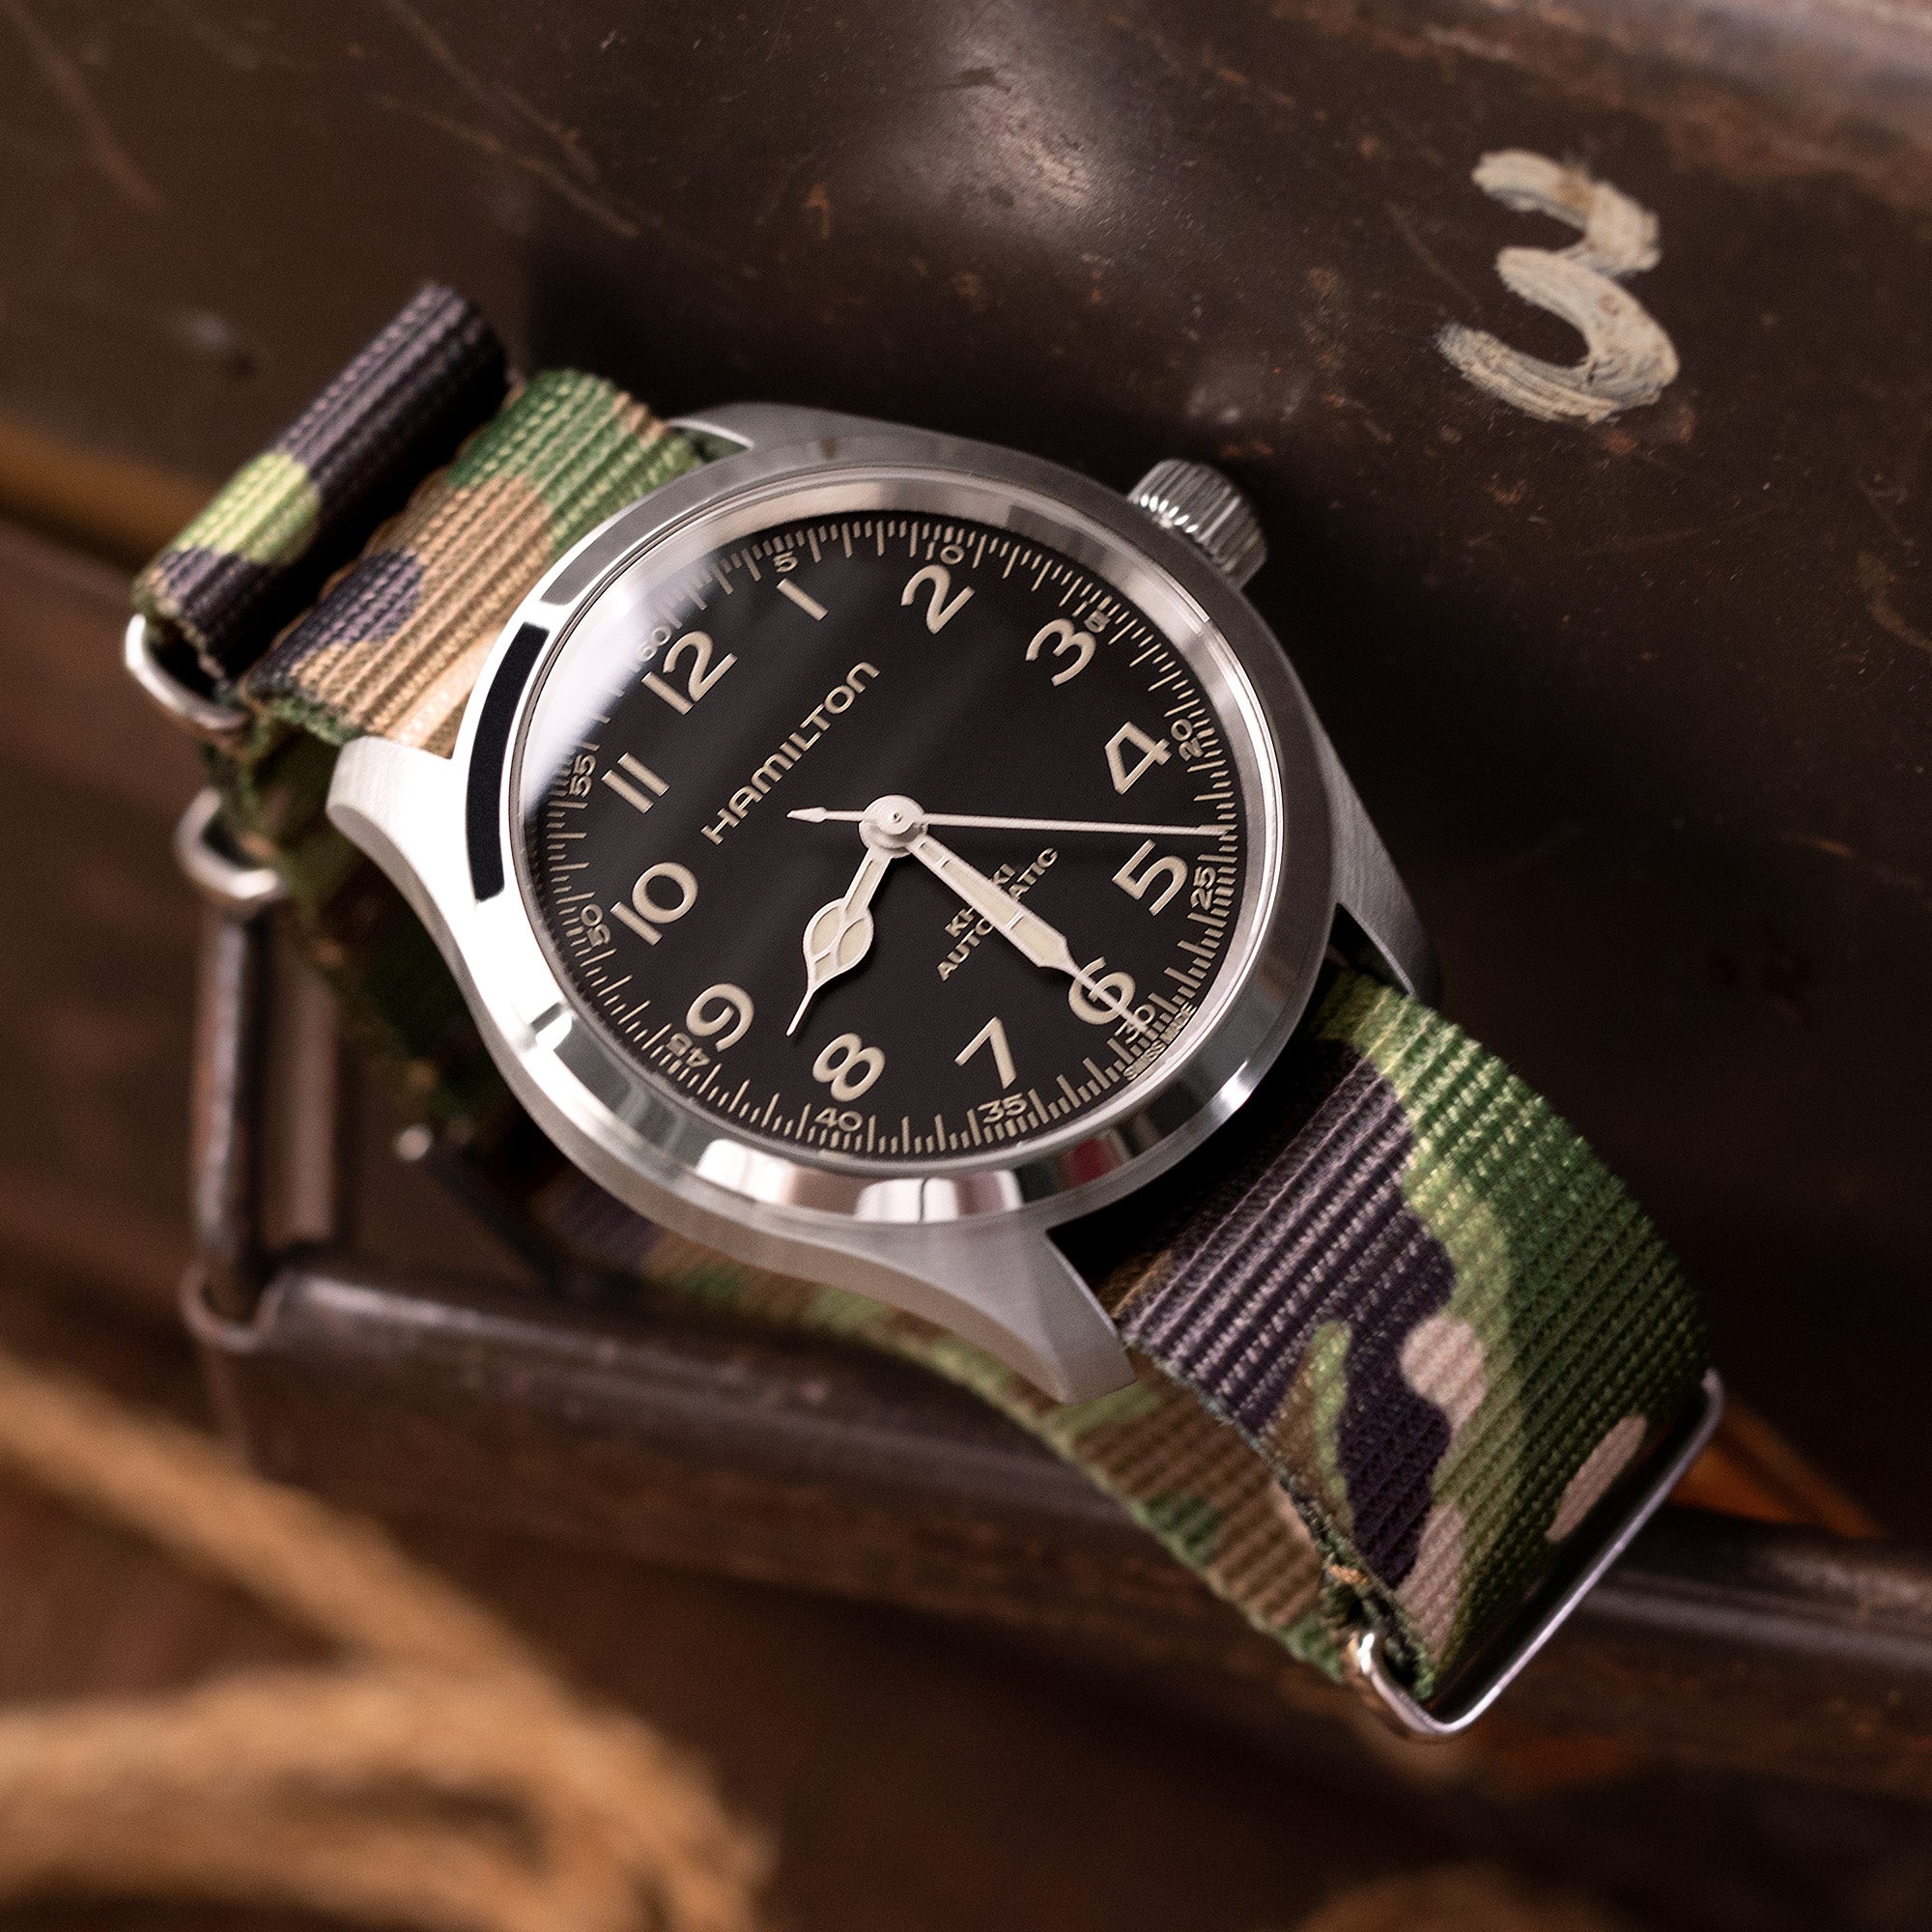 20mm NATO G10 Nylon Military Watch Strap Woodland Camouflage Polished Strapcode Watch Bands